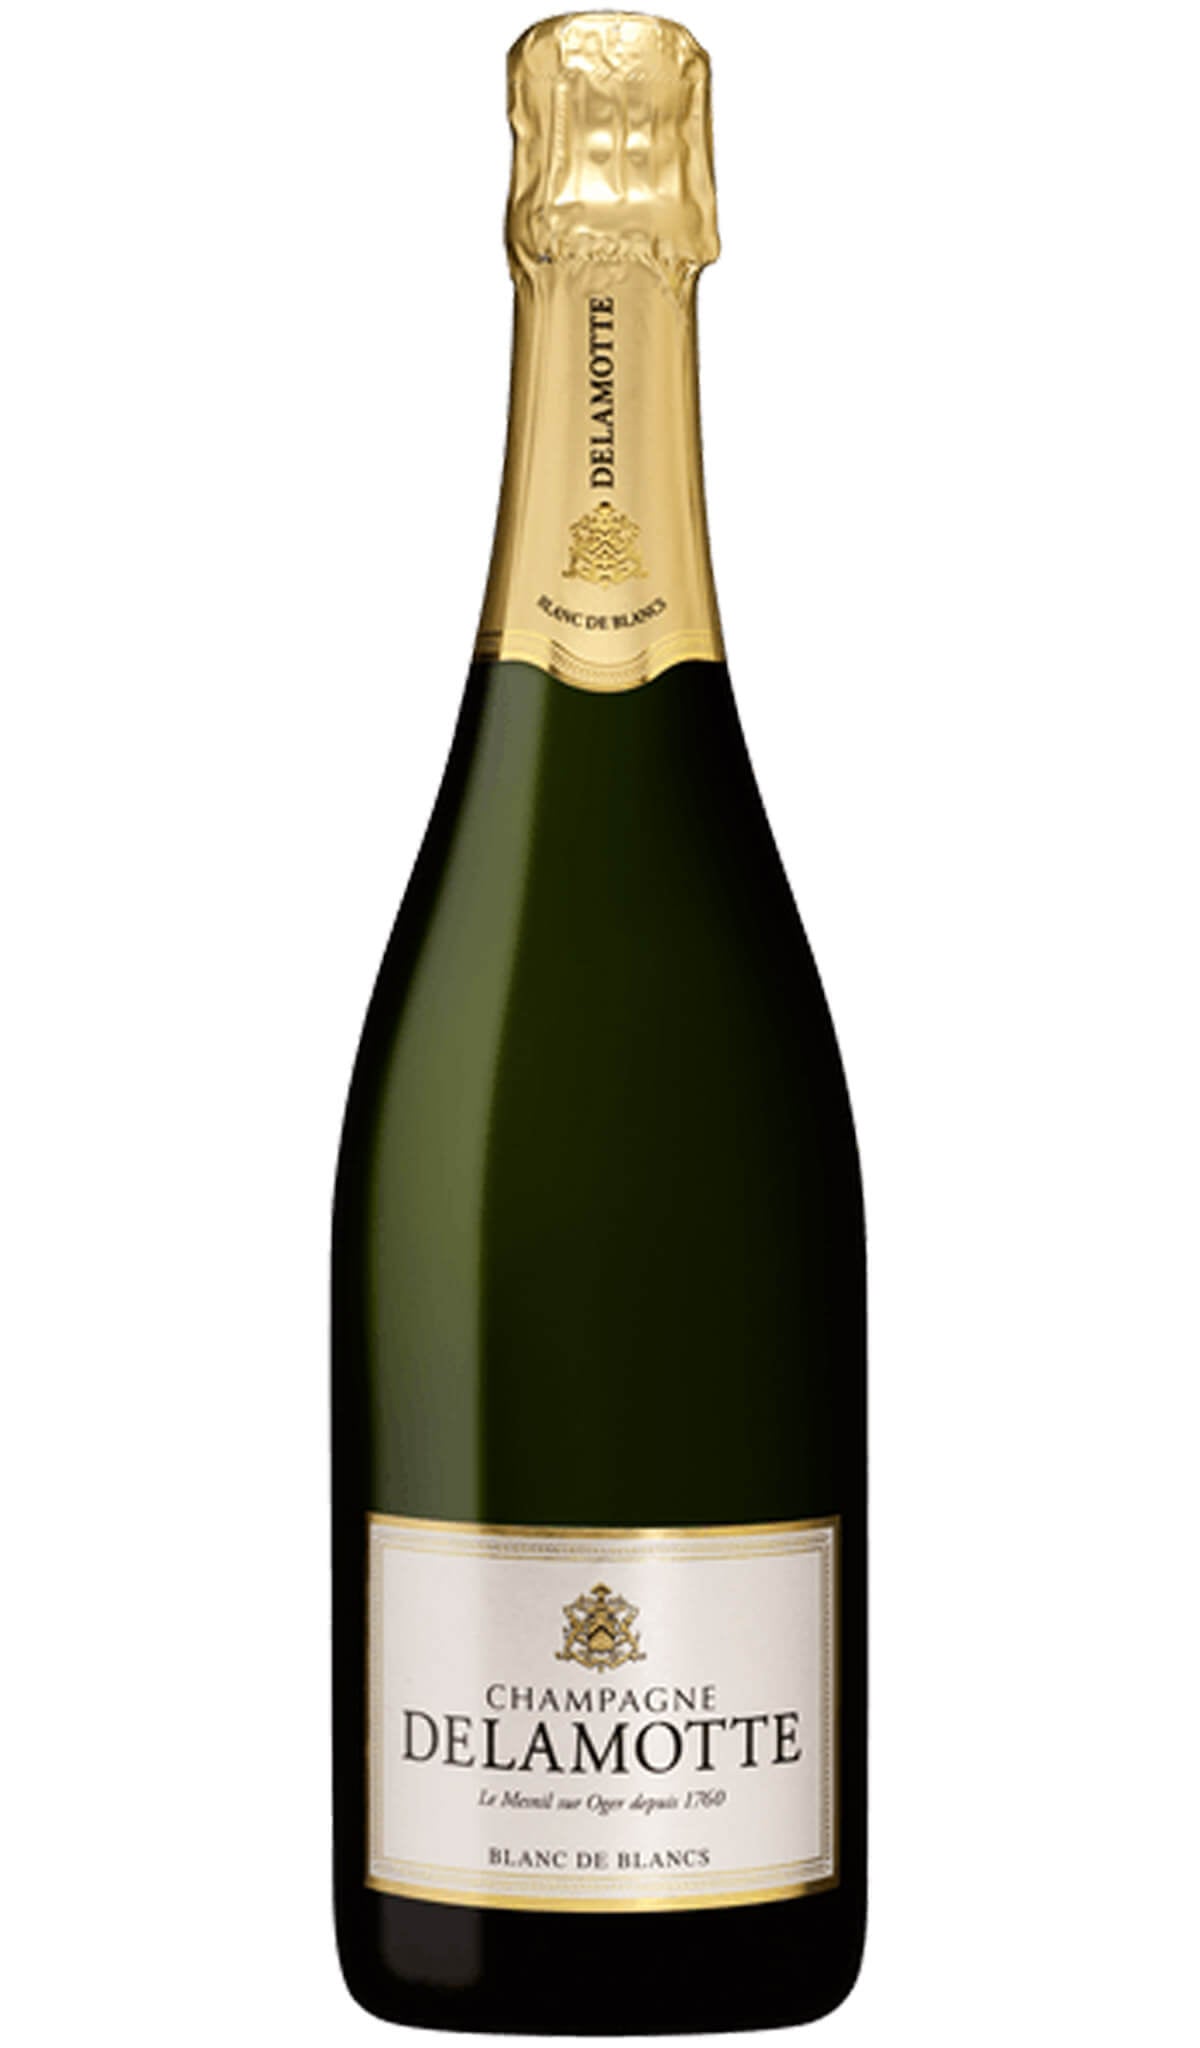 Find out more, explore the range and buy Delamotte Blanc De Blanc Champagne NV 750mL (France) available online at Wine Sellers Direct - Australia's independent liquor specialists.